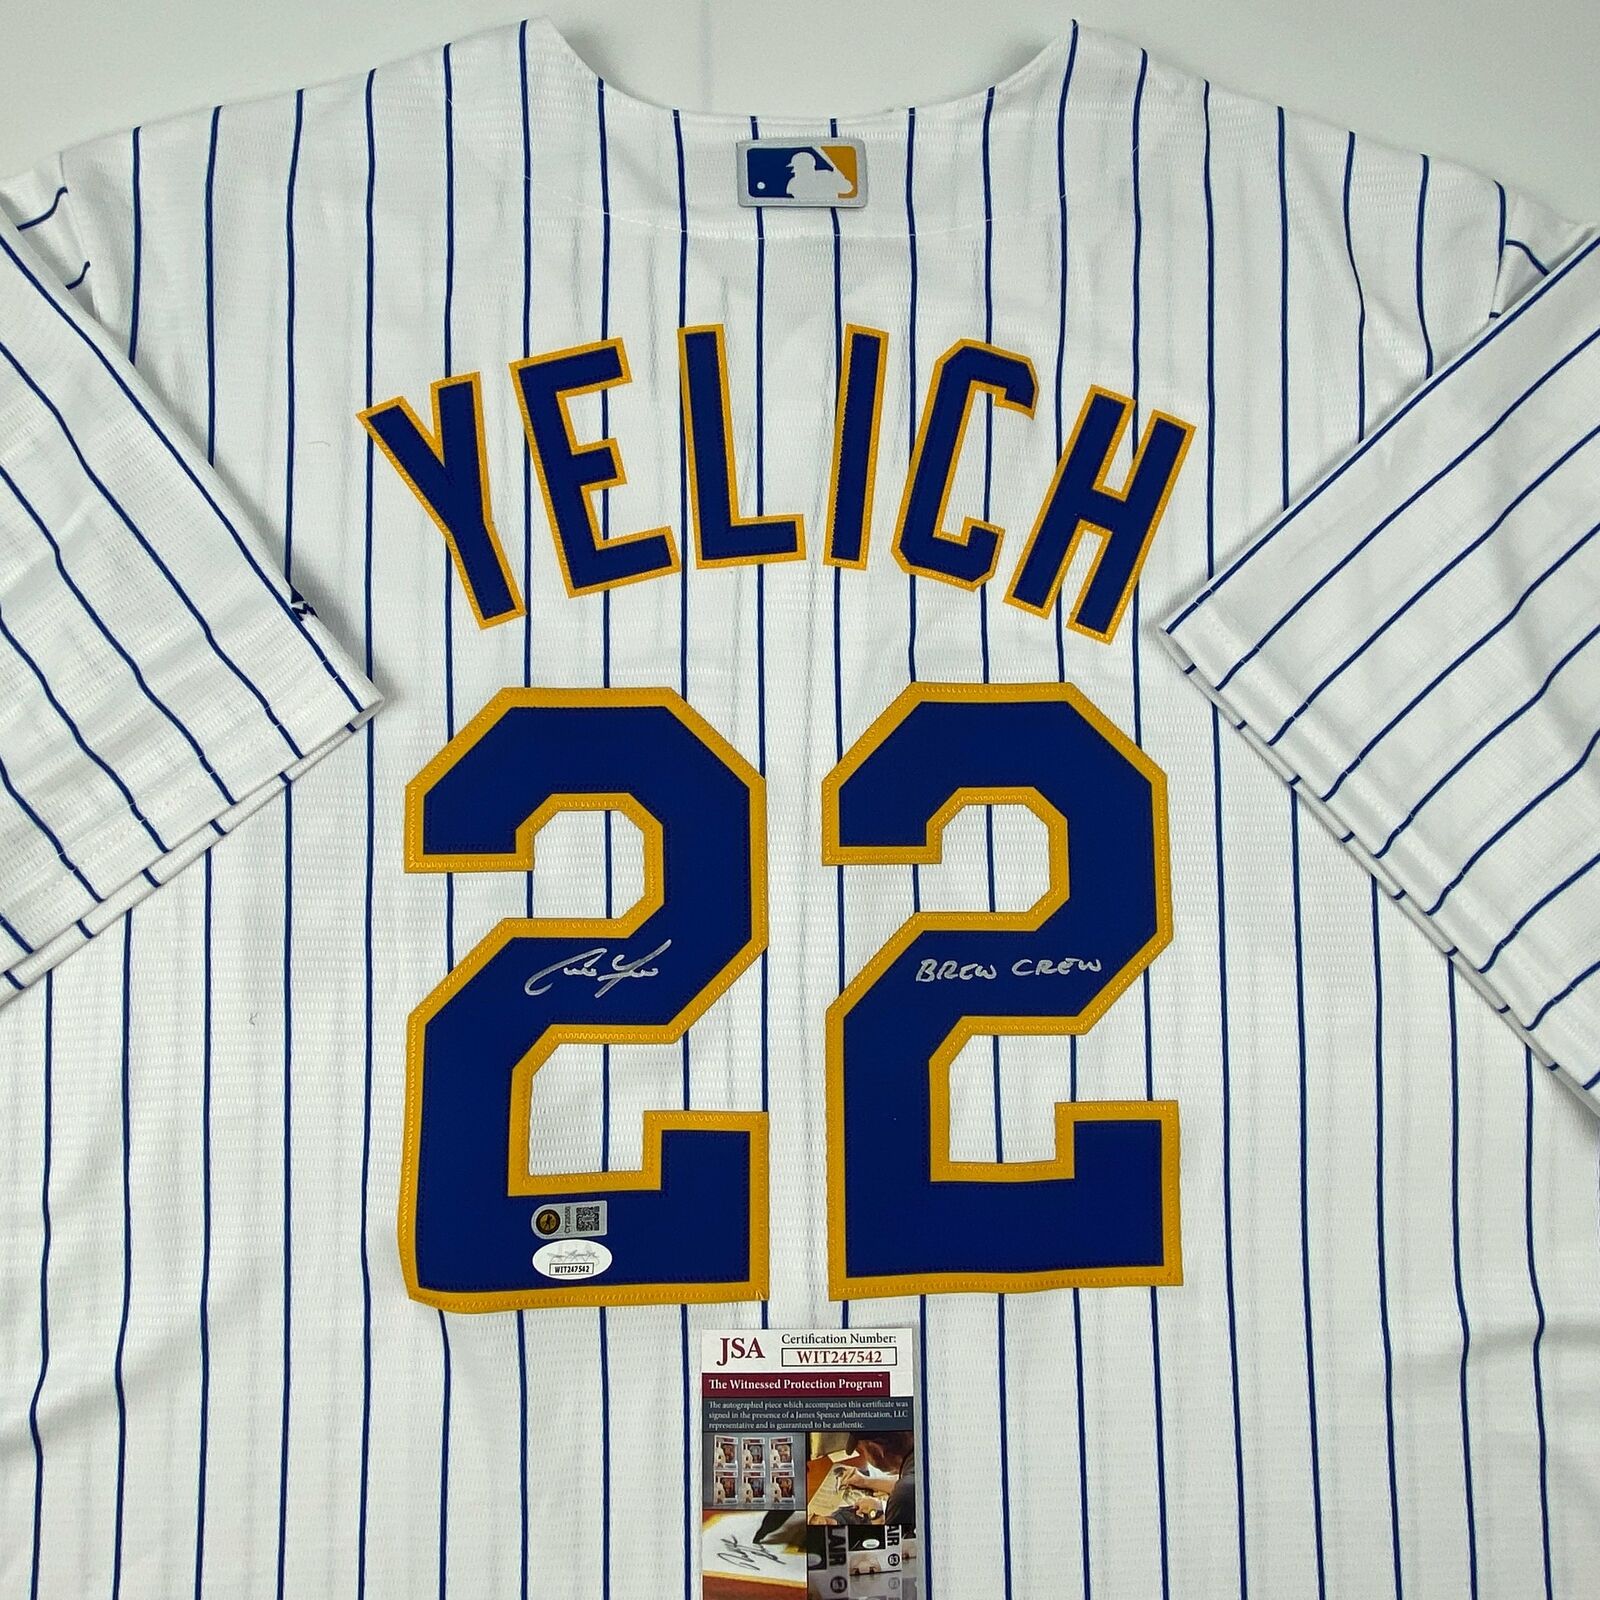 Autographed/Signed Christian Yelich Brew Crew Brewers Pinstripe